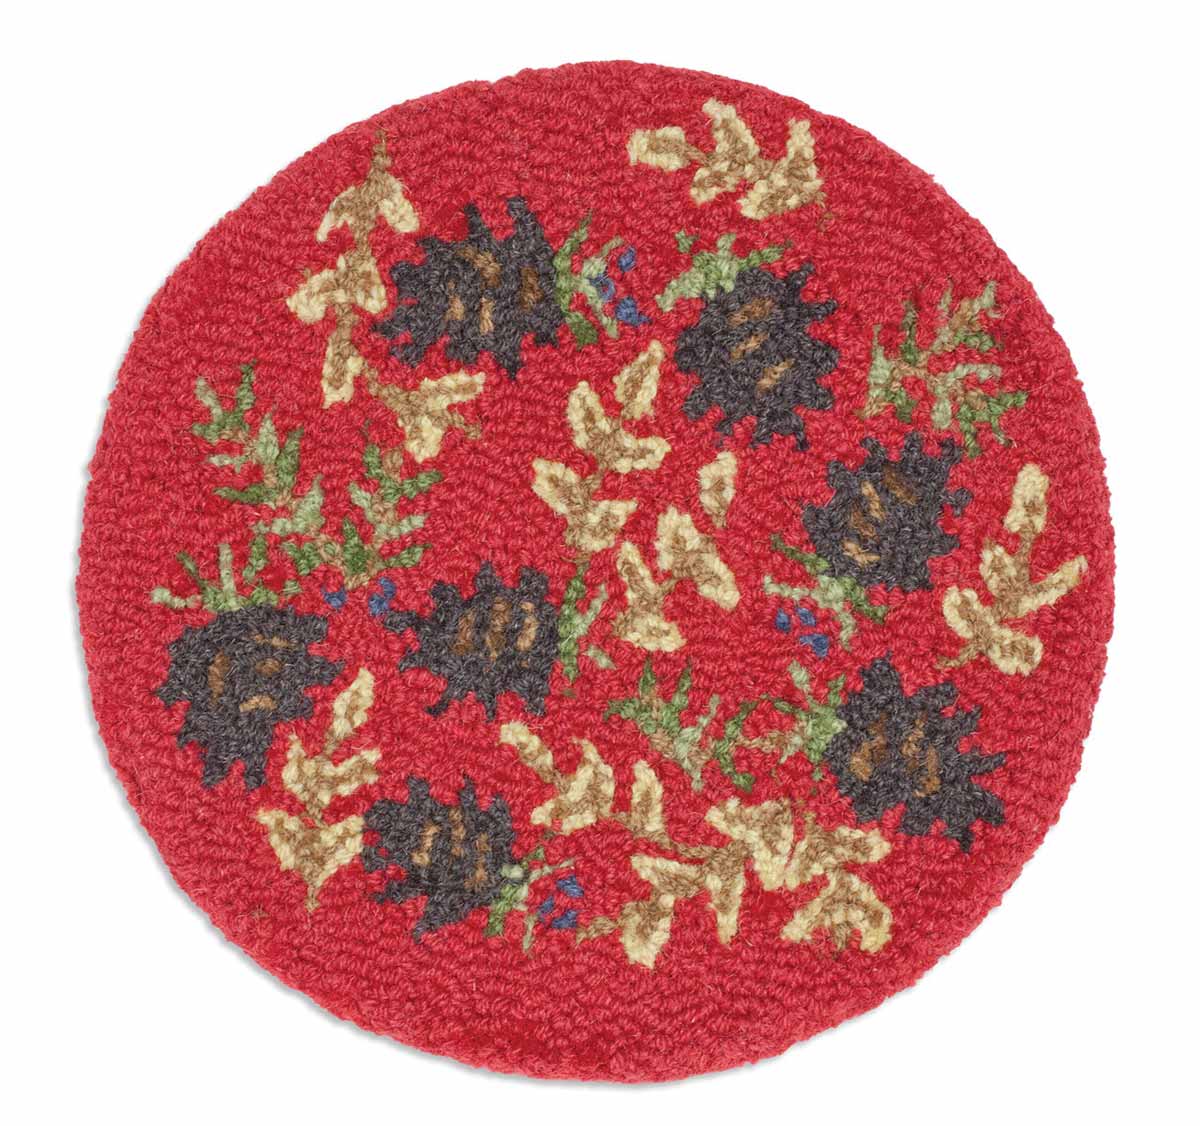 Chandler 4 Corners Ruby Pinecone 14" Chairpad